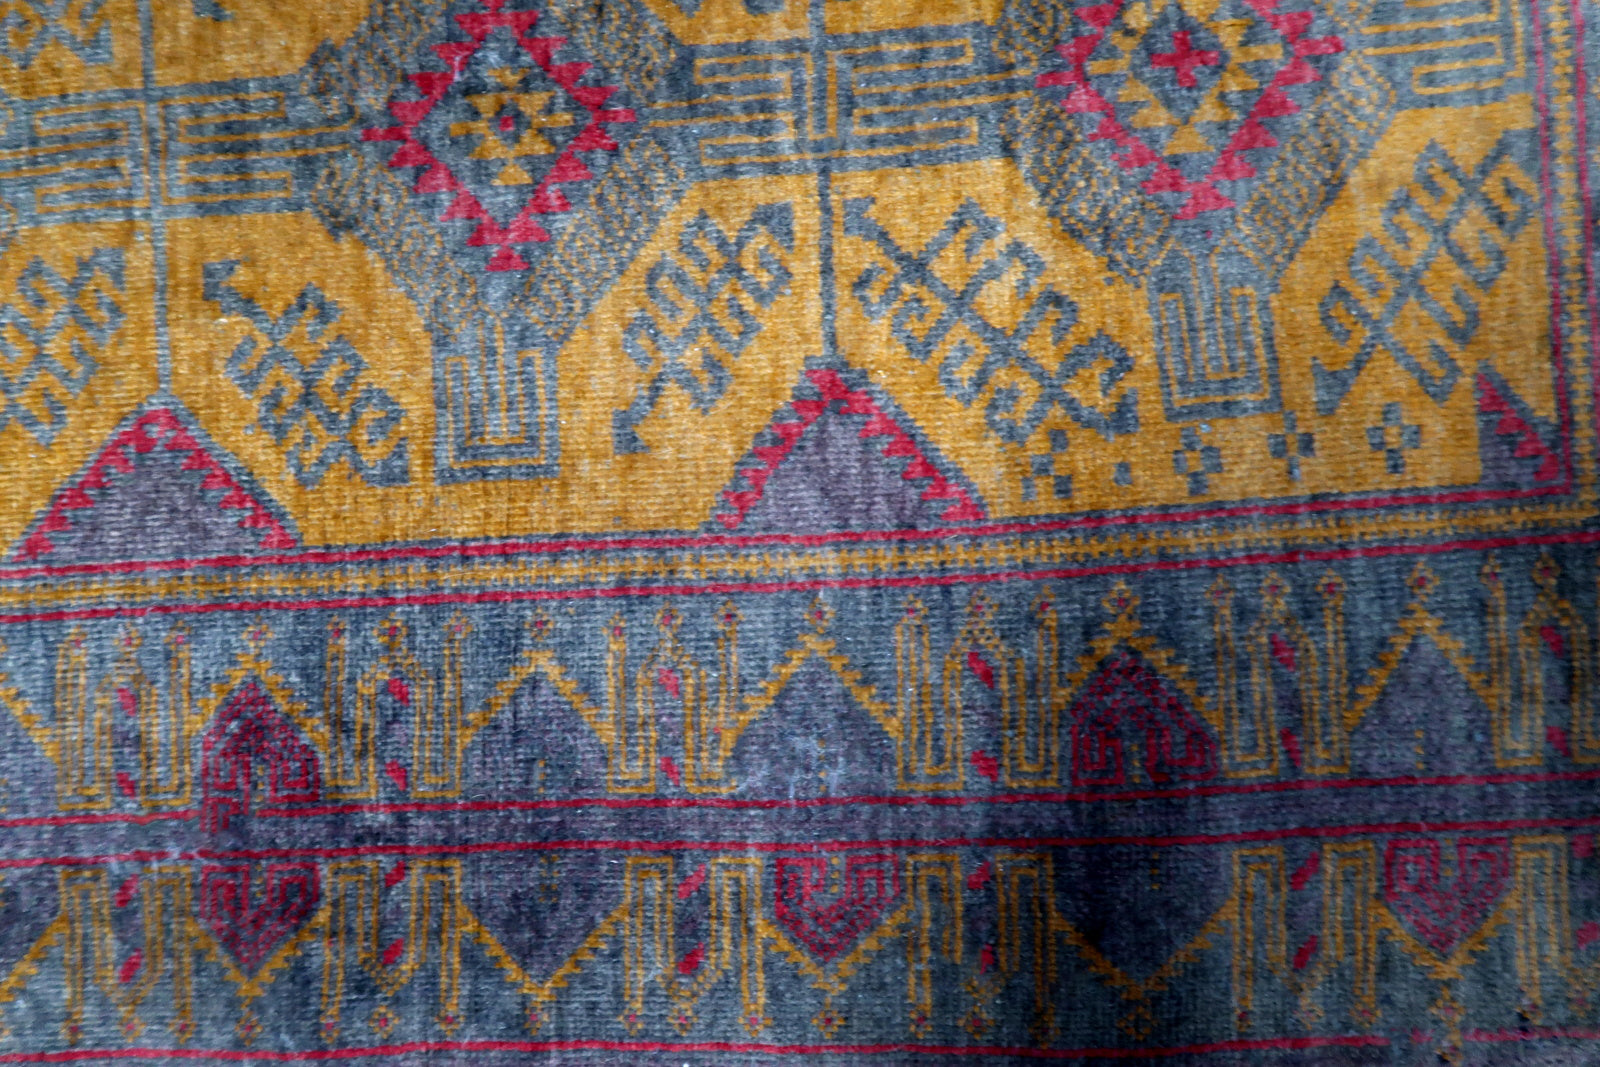 Fine craftsmanship and attention to detail on the vintage Baluch rug